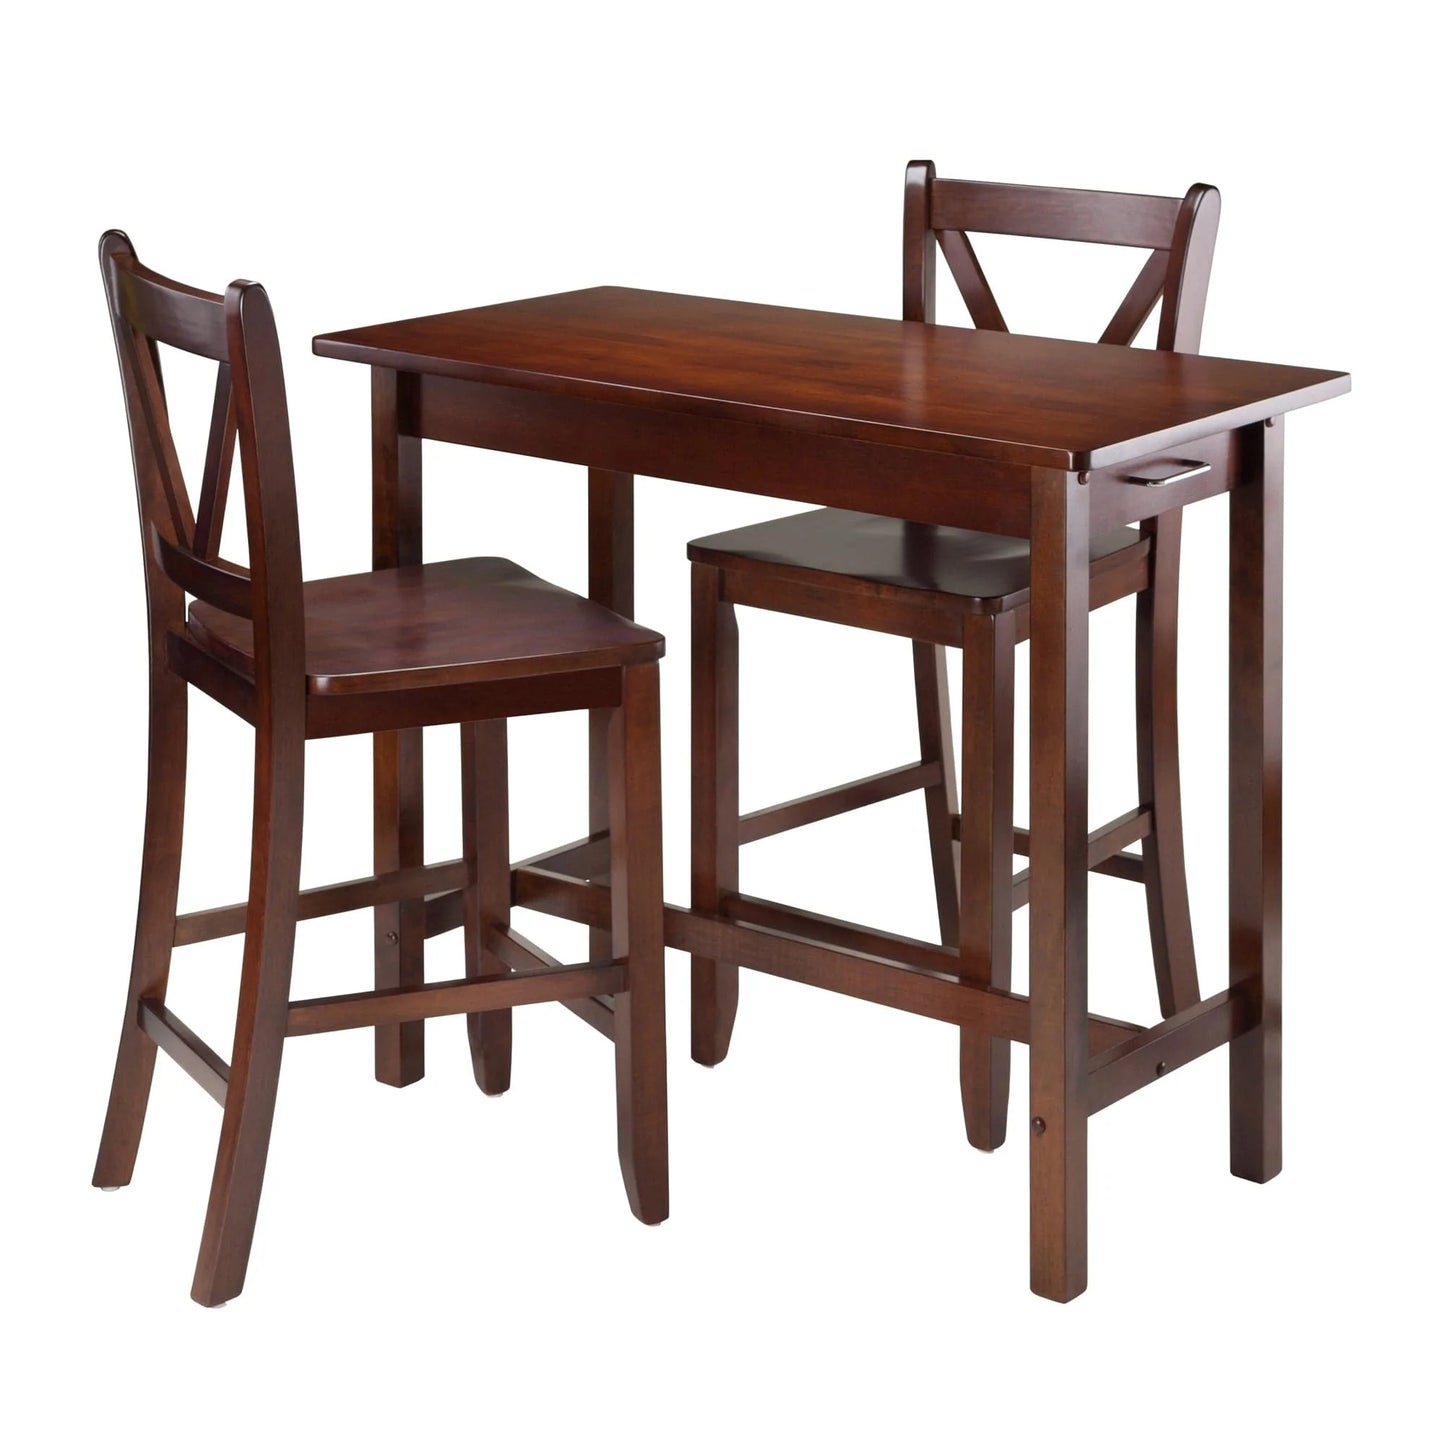 WINSOME Pub Table Set Sally 3-Pc Breakfast Table with V-back Counter Stools, Walnut